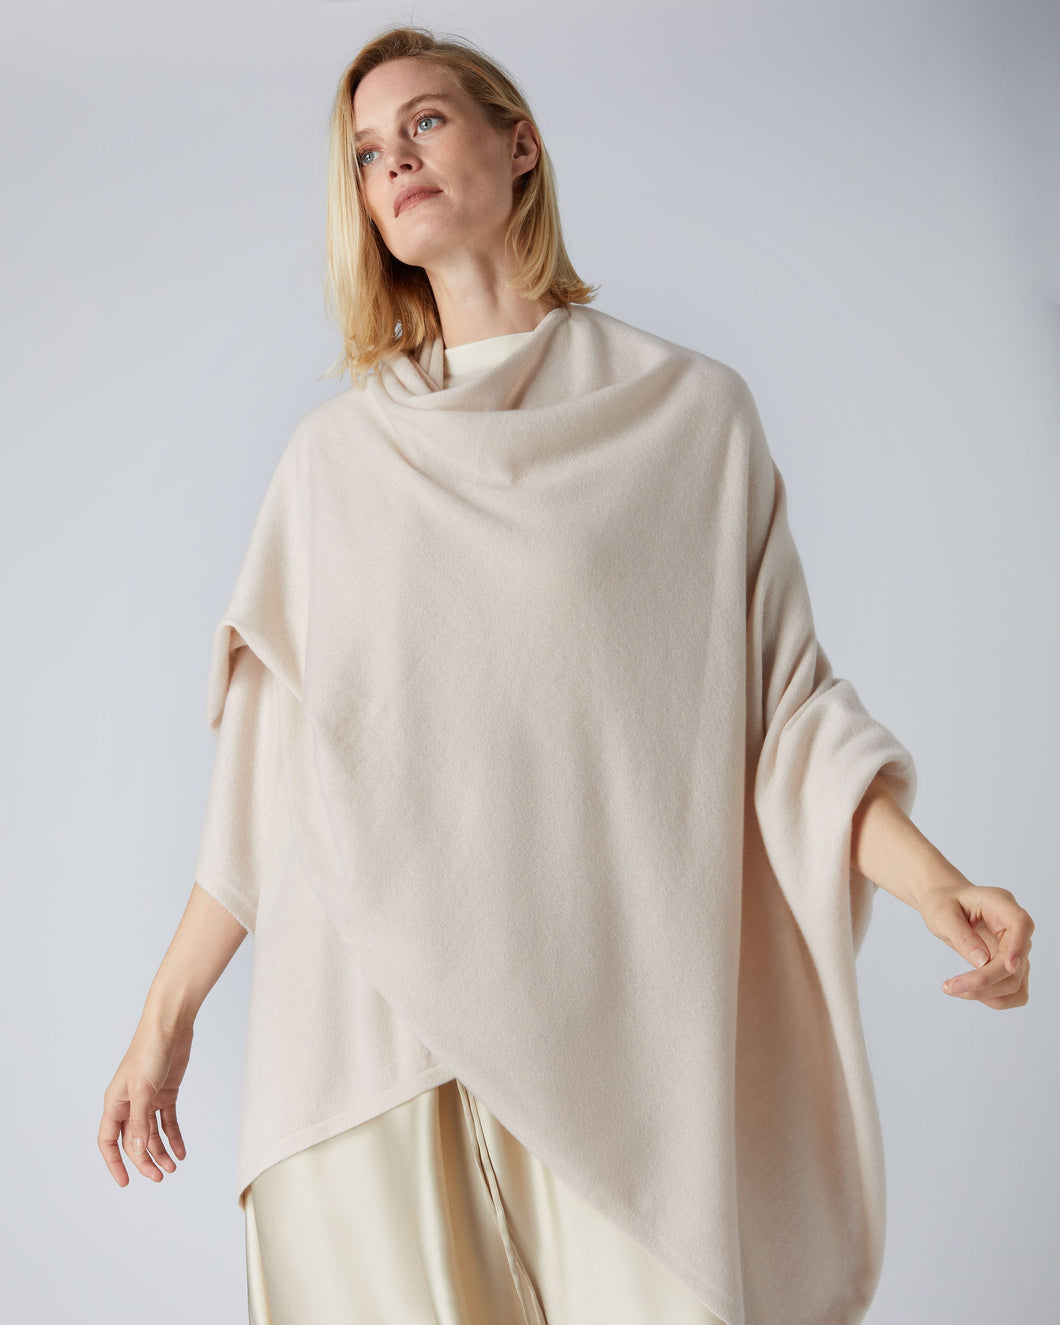 N.Peal Women's Cashmere Knitted Cape Almond White